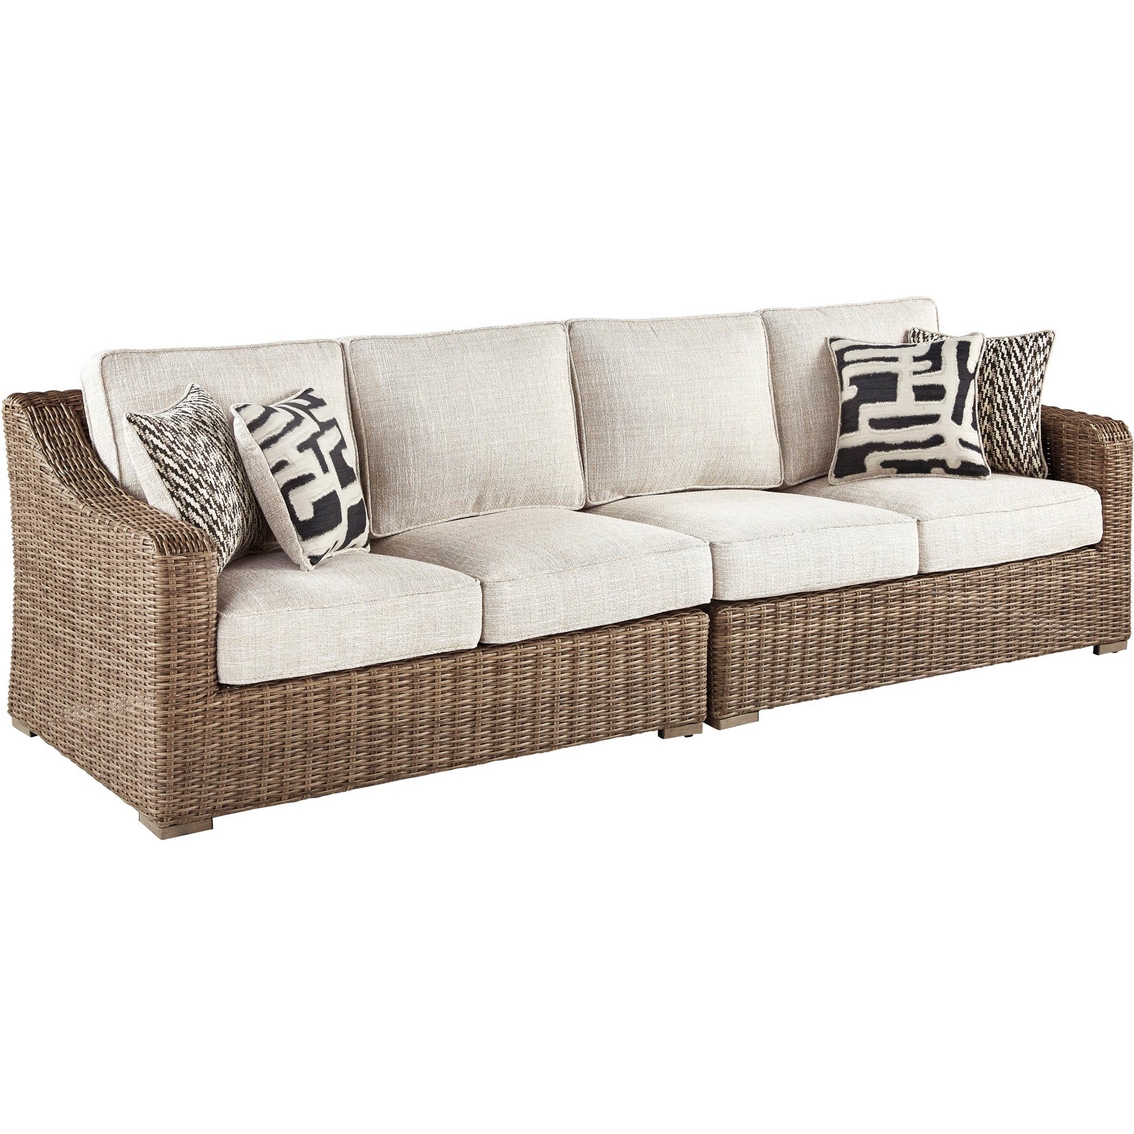 Signature Design by Ashley Beachcroft 3 pc. Outdoor Sectional - Image 3 of 7